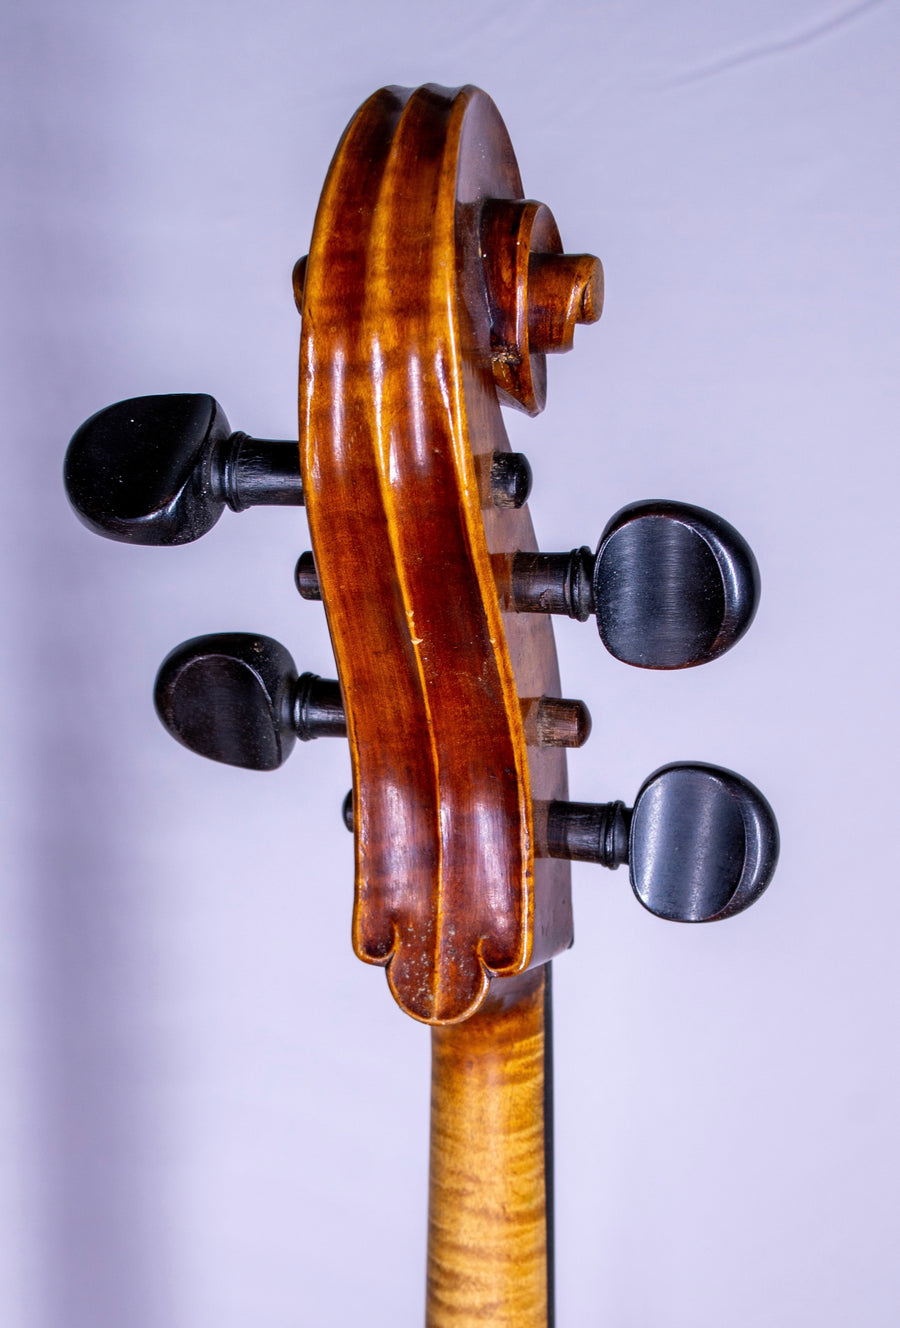 Herman Lowendall Cello, First Decade 20th Century